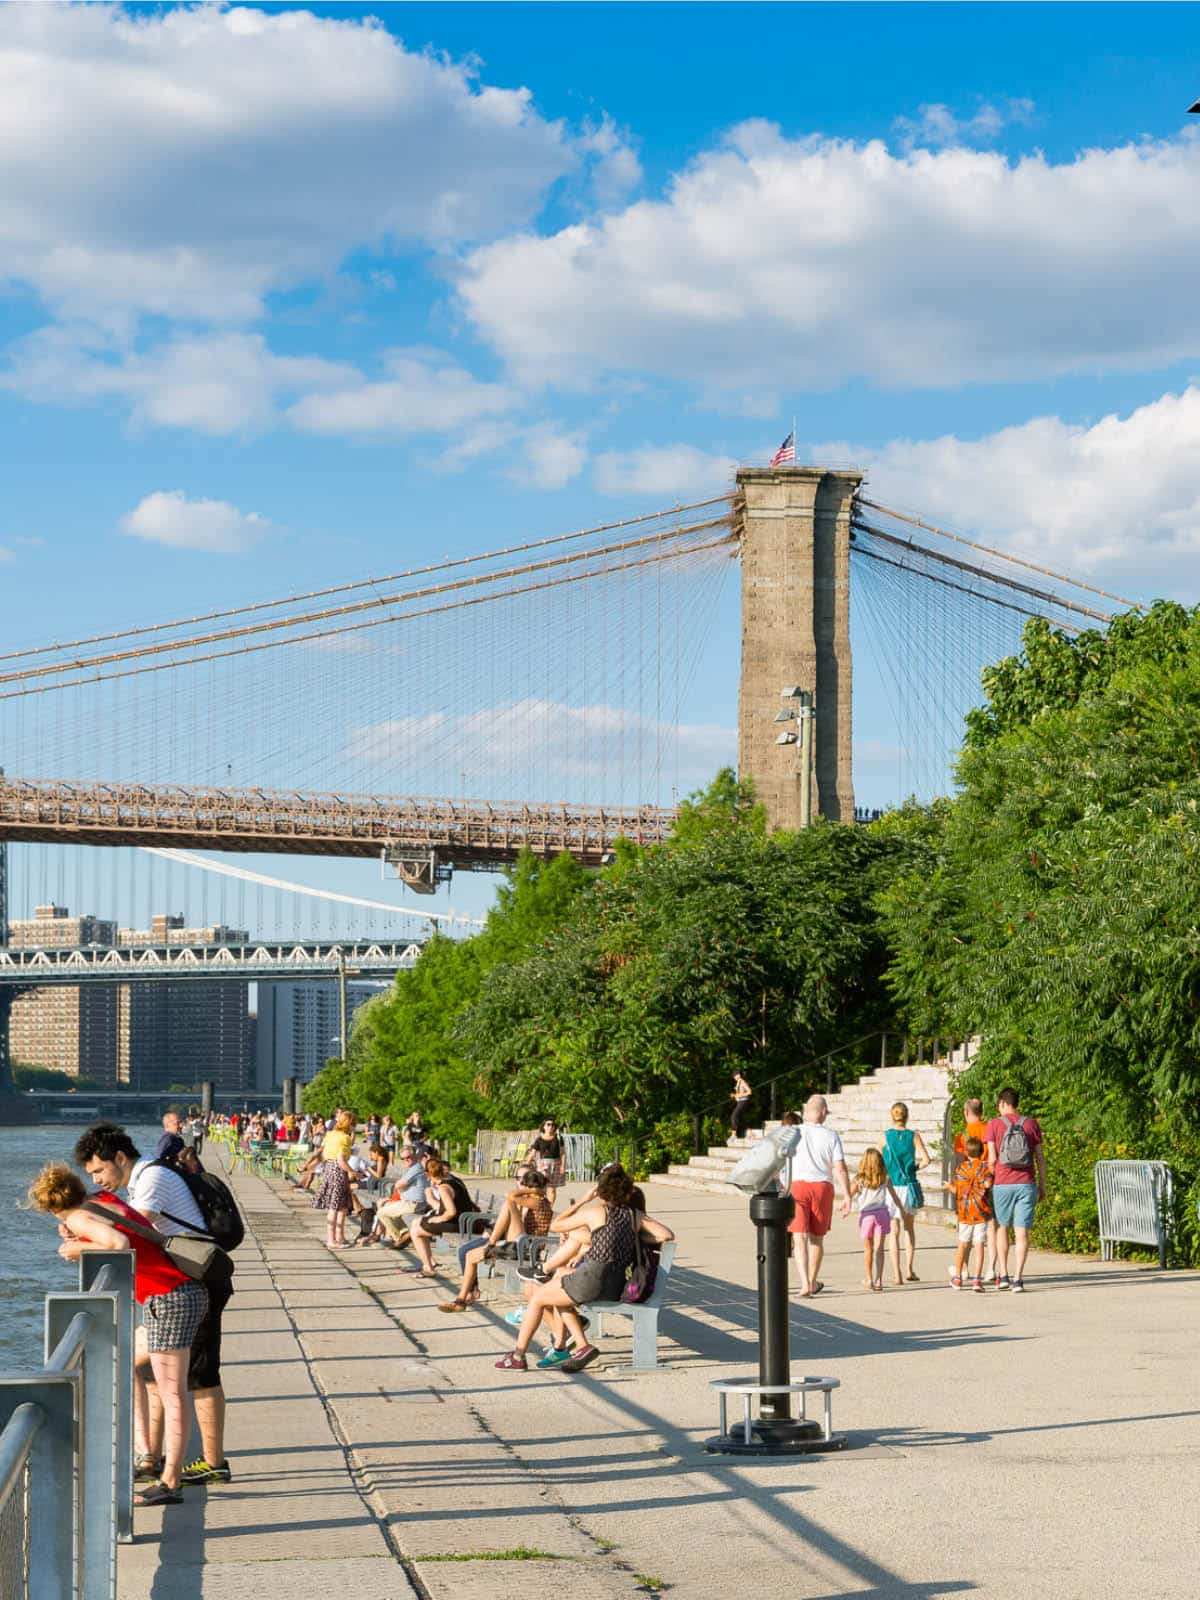 People sitting on promenade on a sunny day. The Brooklyn Bridge is seen in the background.